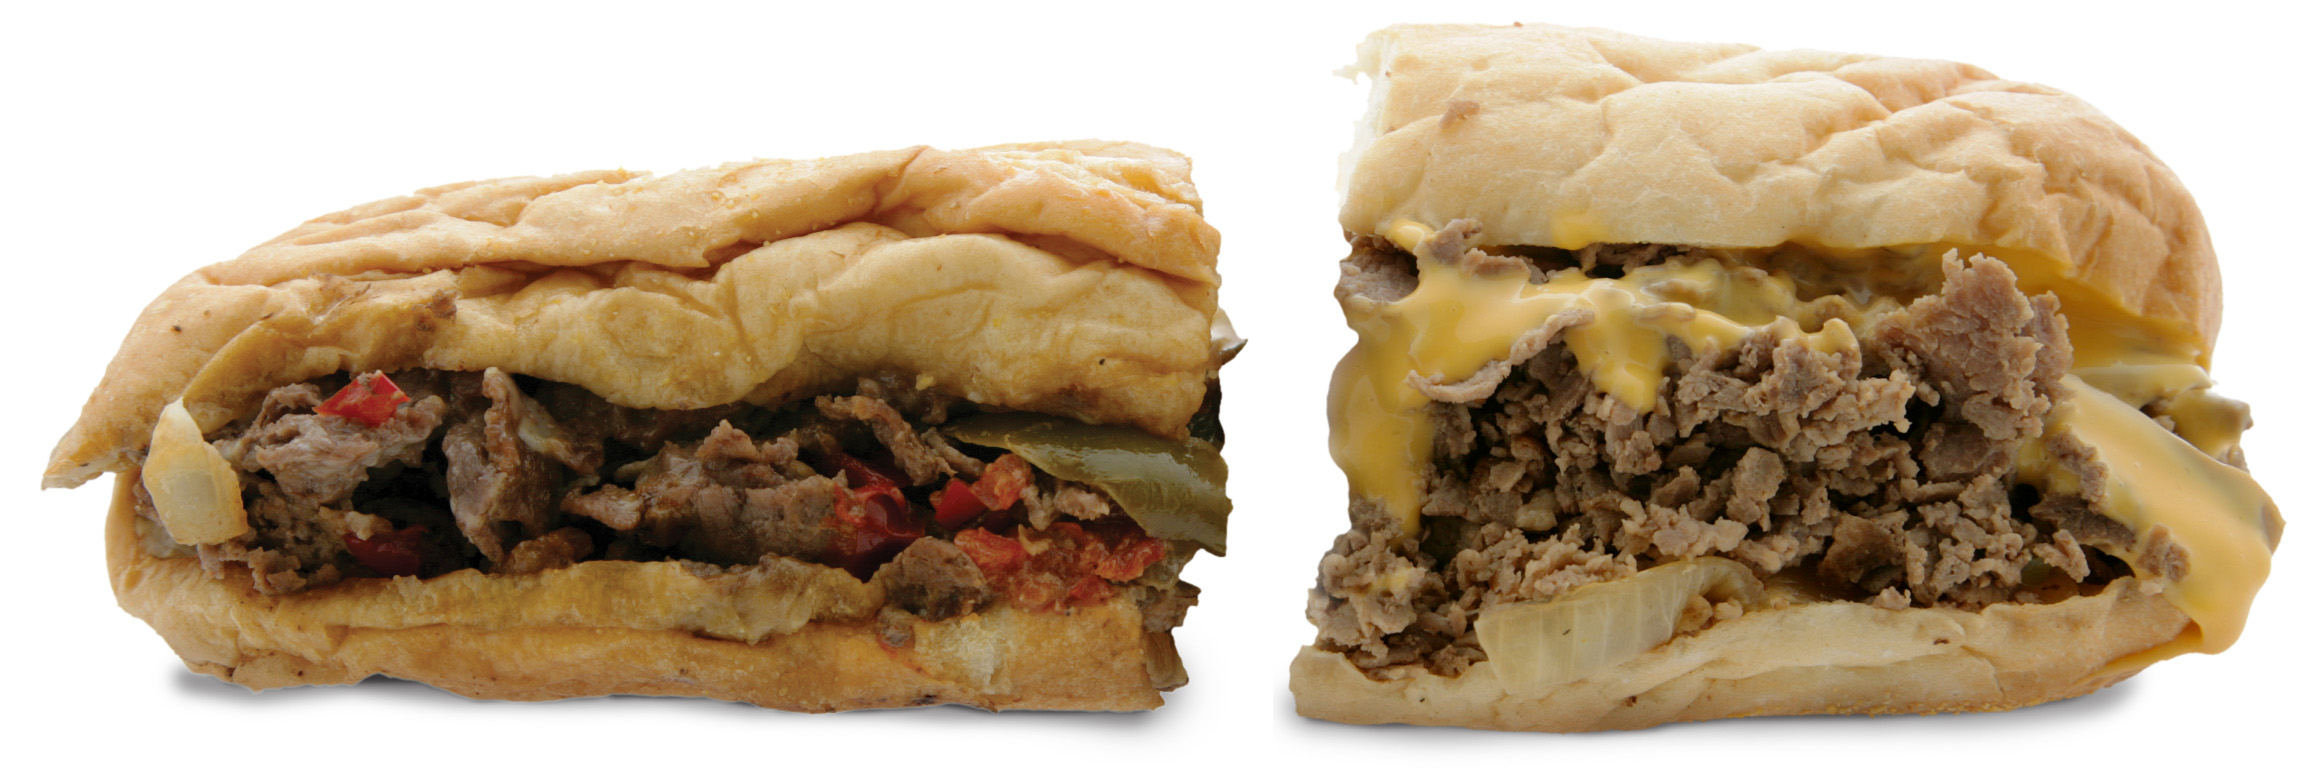 Capriotti's Cheesesteak - Capriotti S On Twitter When It Comes To A Capriottis Cheese Steak Some ...